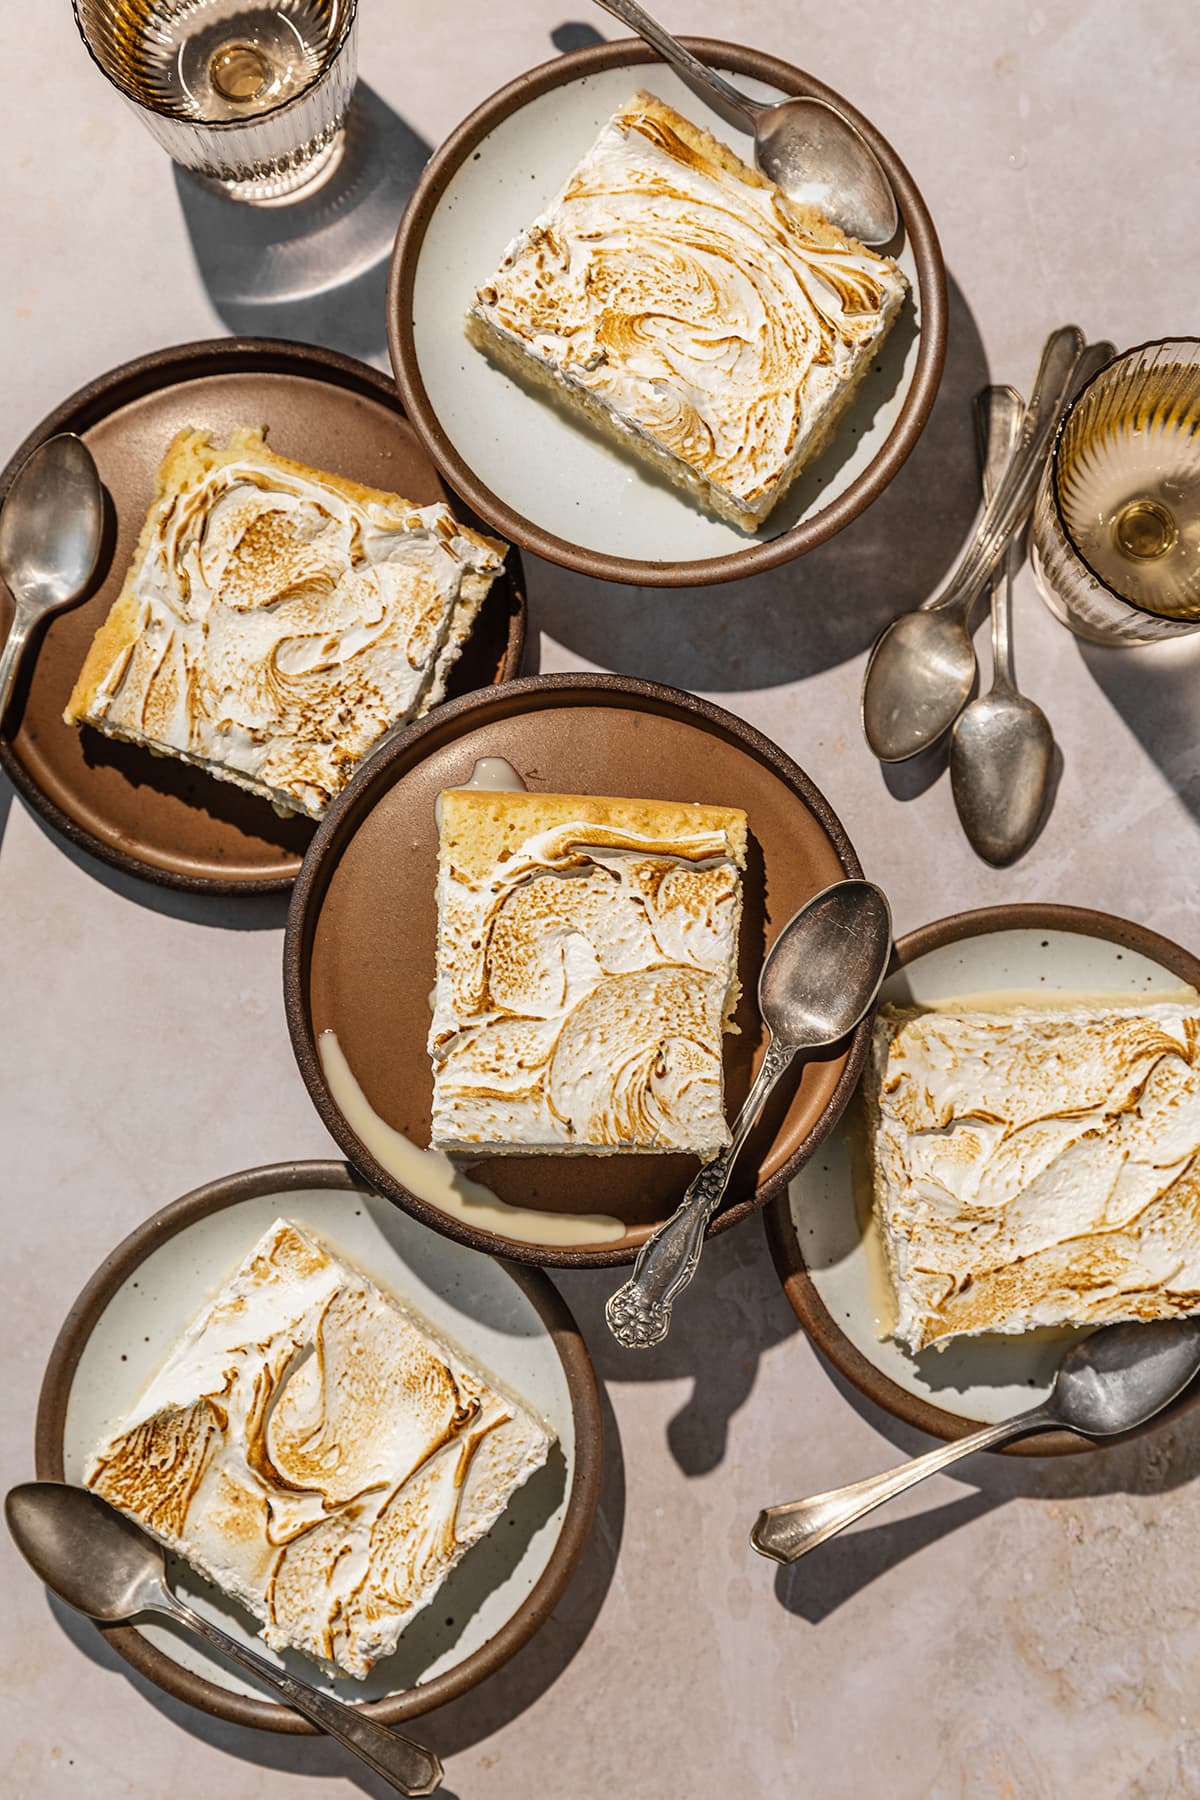 tres leches cake slices with meringue topping served on dessert plates with spoons